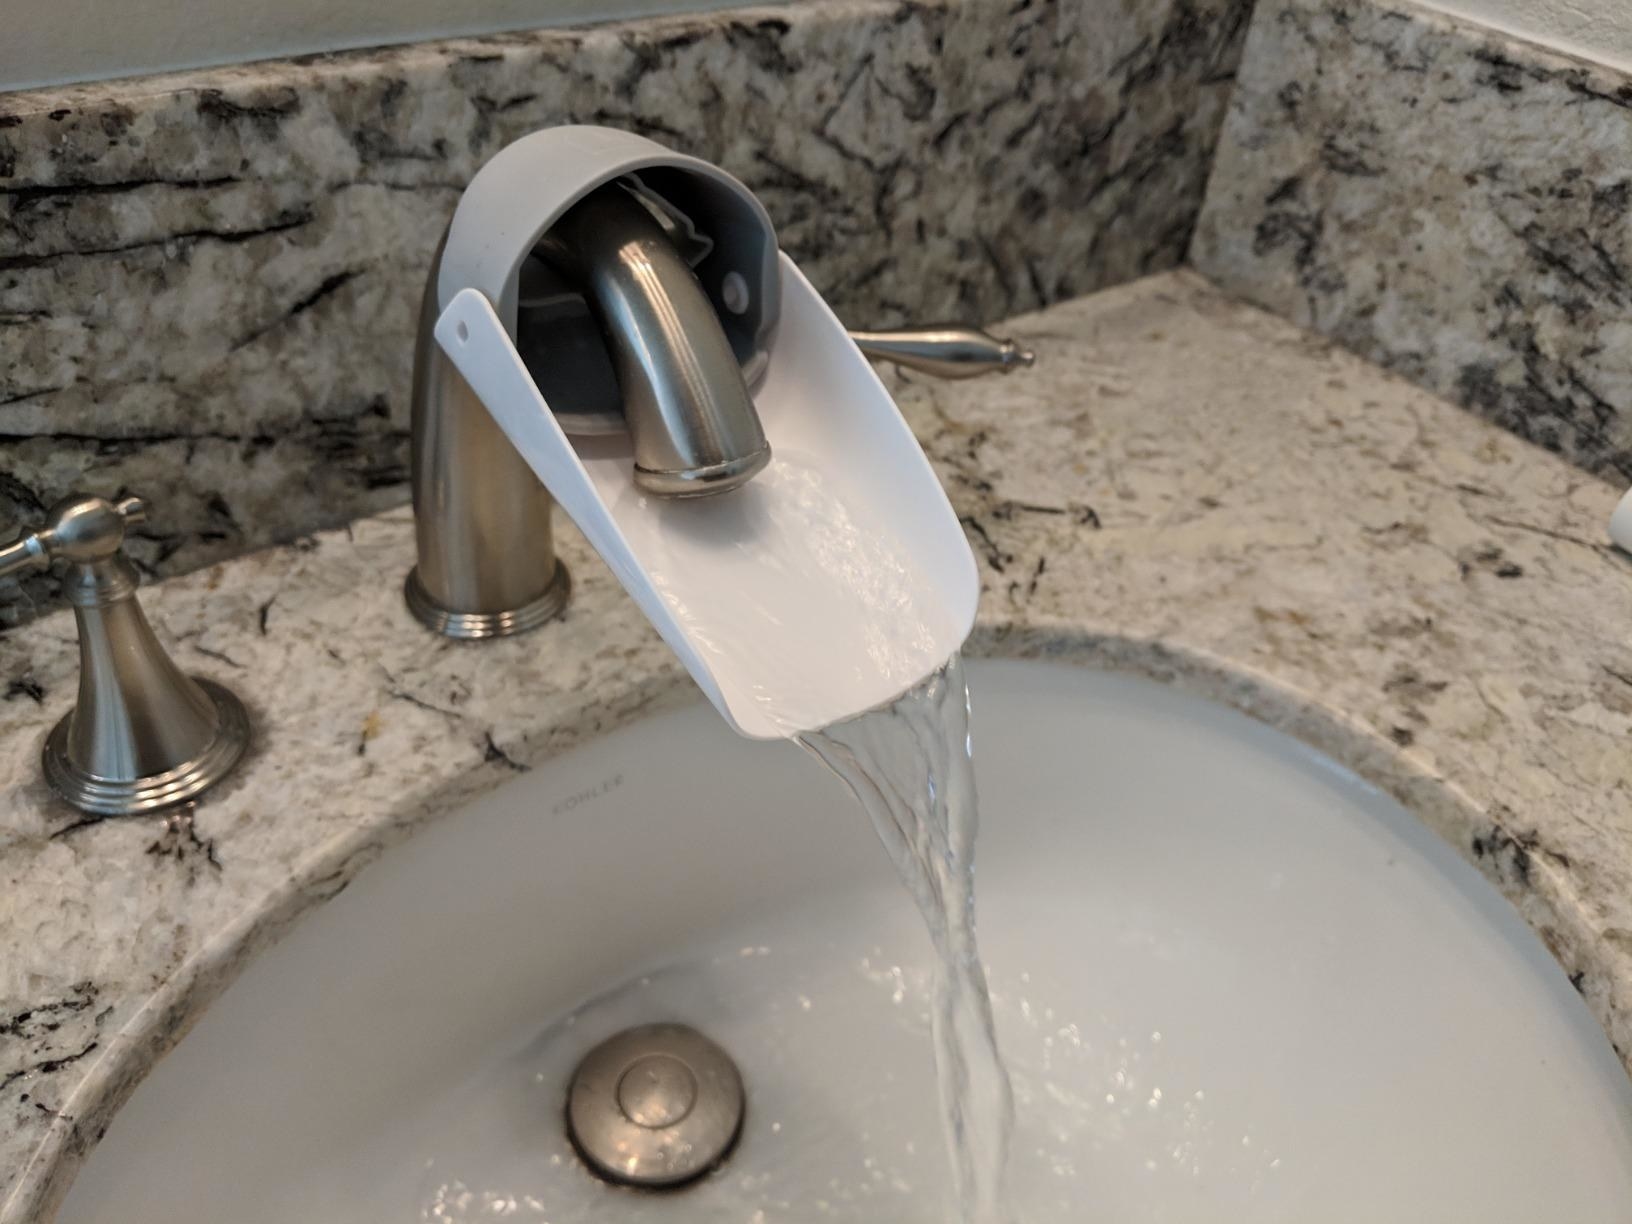 the faucet extender on a running faucet